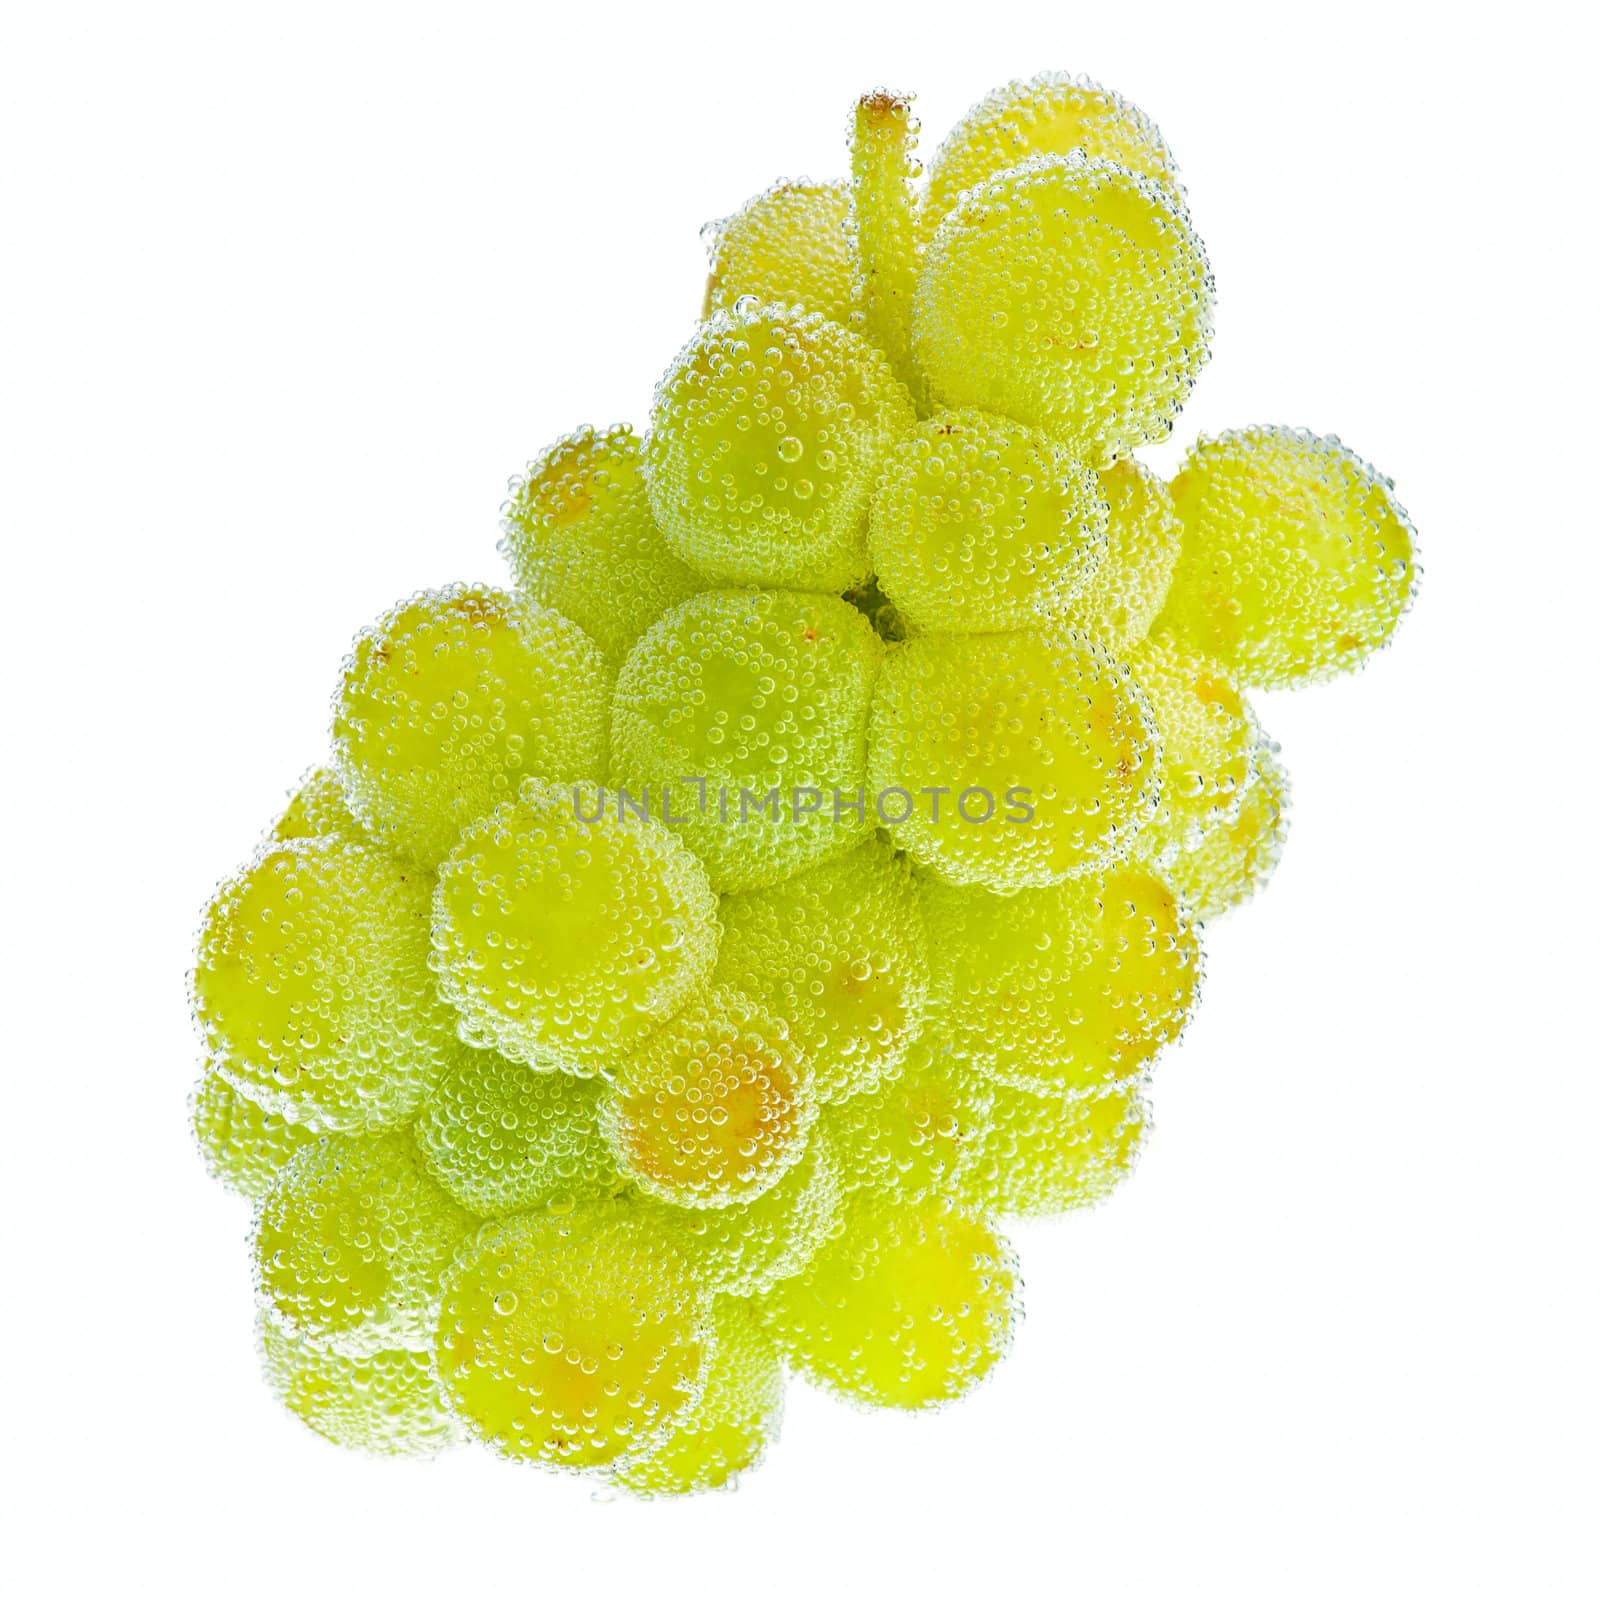 Grapes in water with bubbles on white background